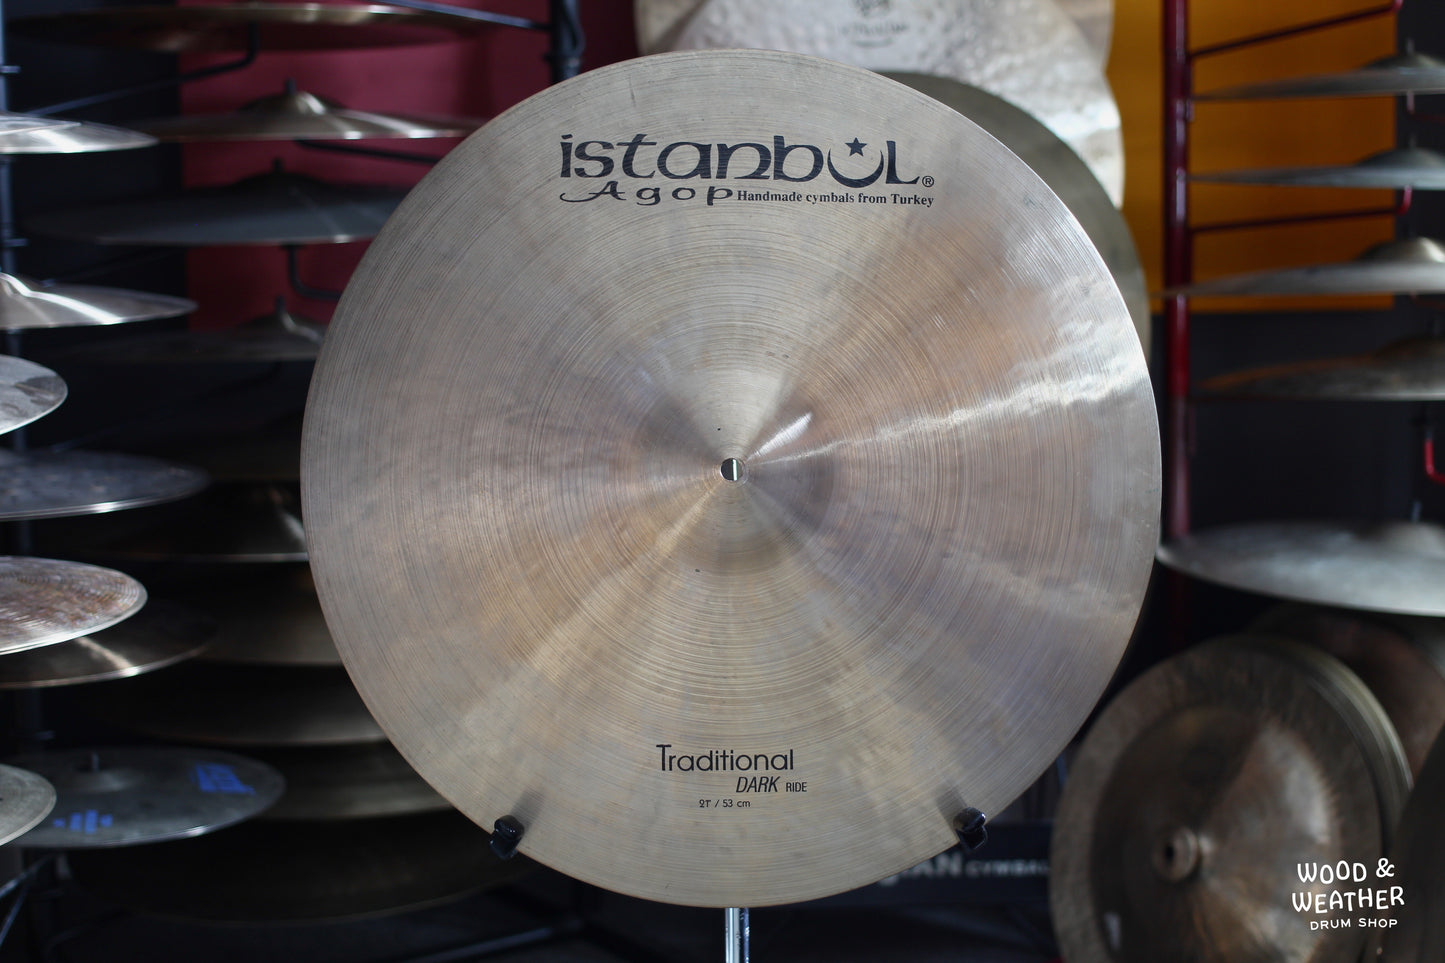 Used Istanbul Agop 21" Traditional Dark Ride Cymbal 2187g